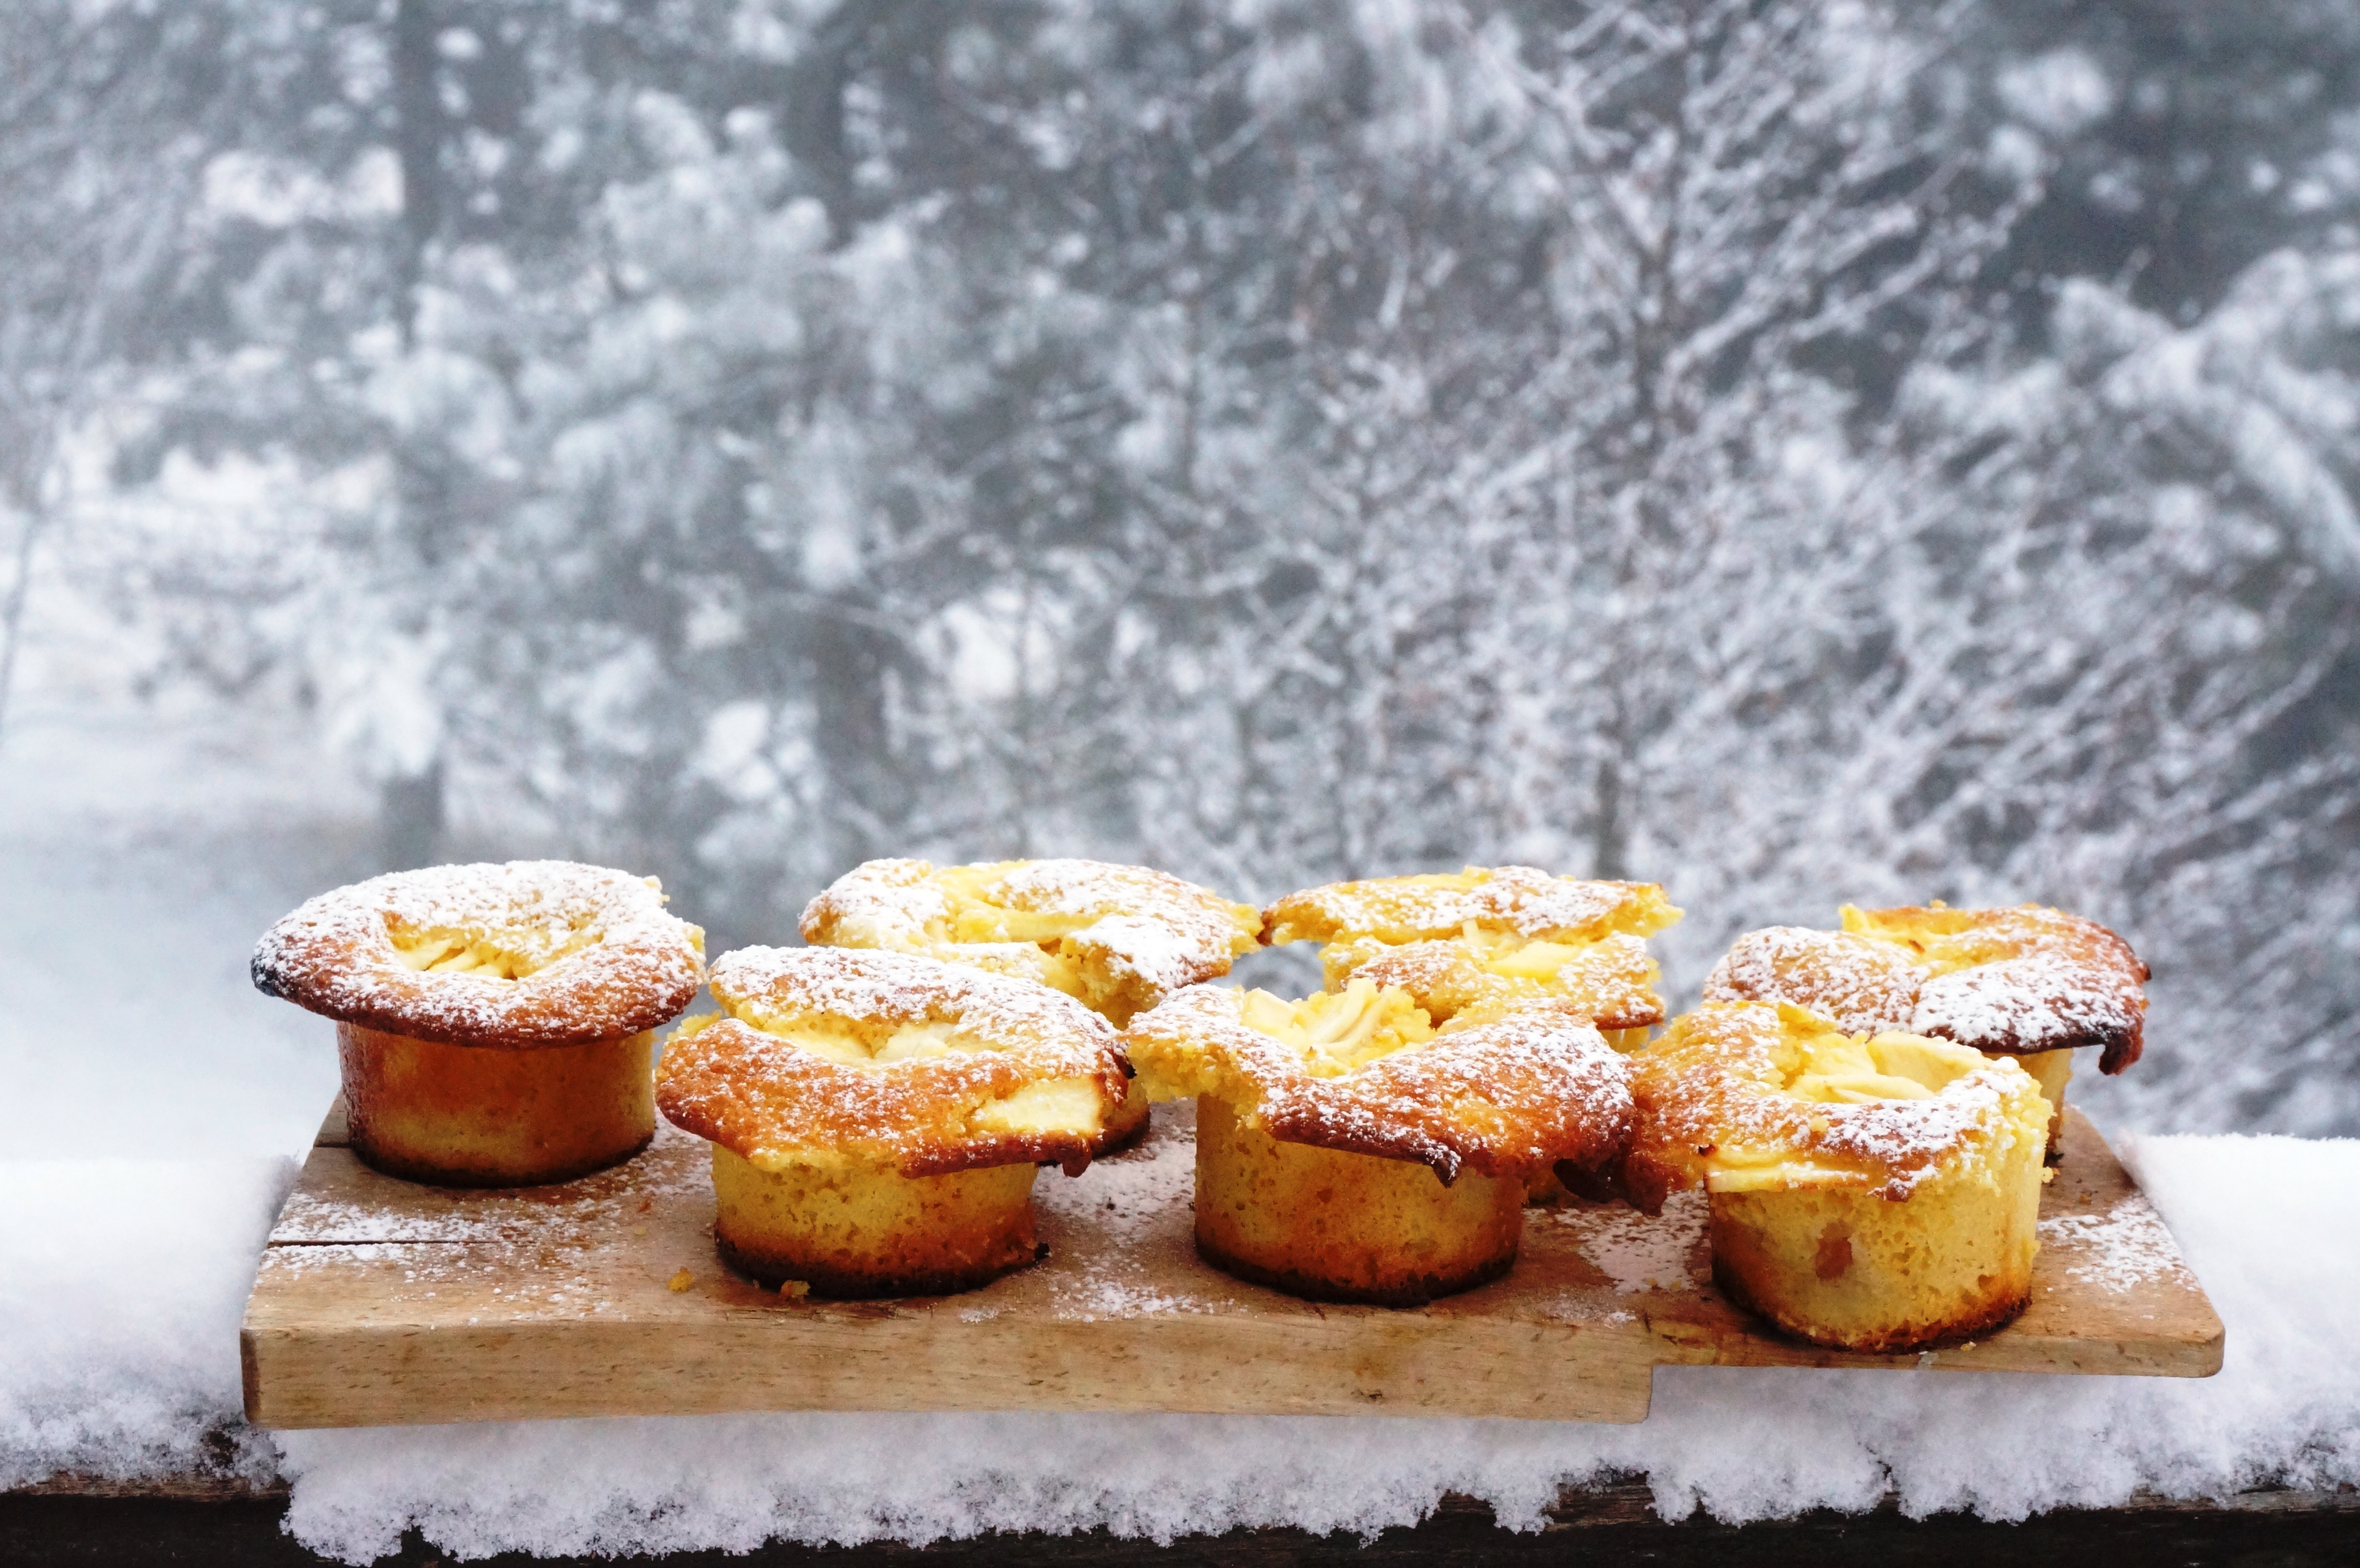 Fluffly and tempting: our snow-muffins